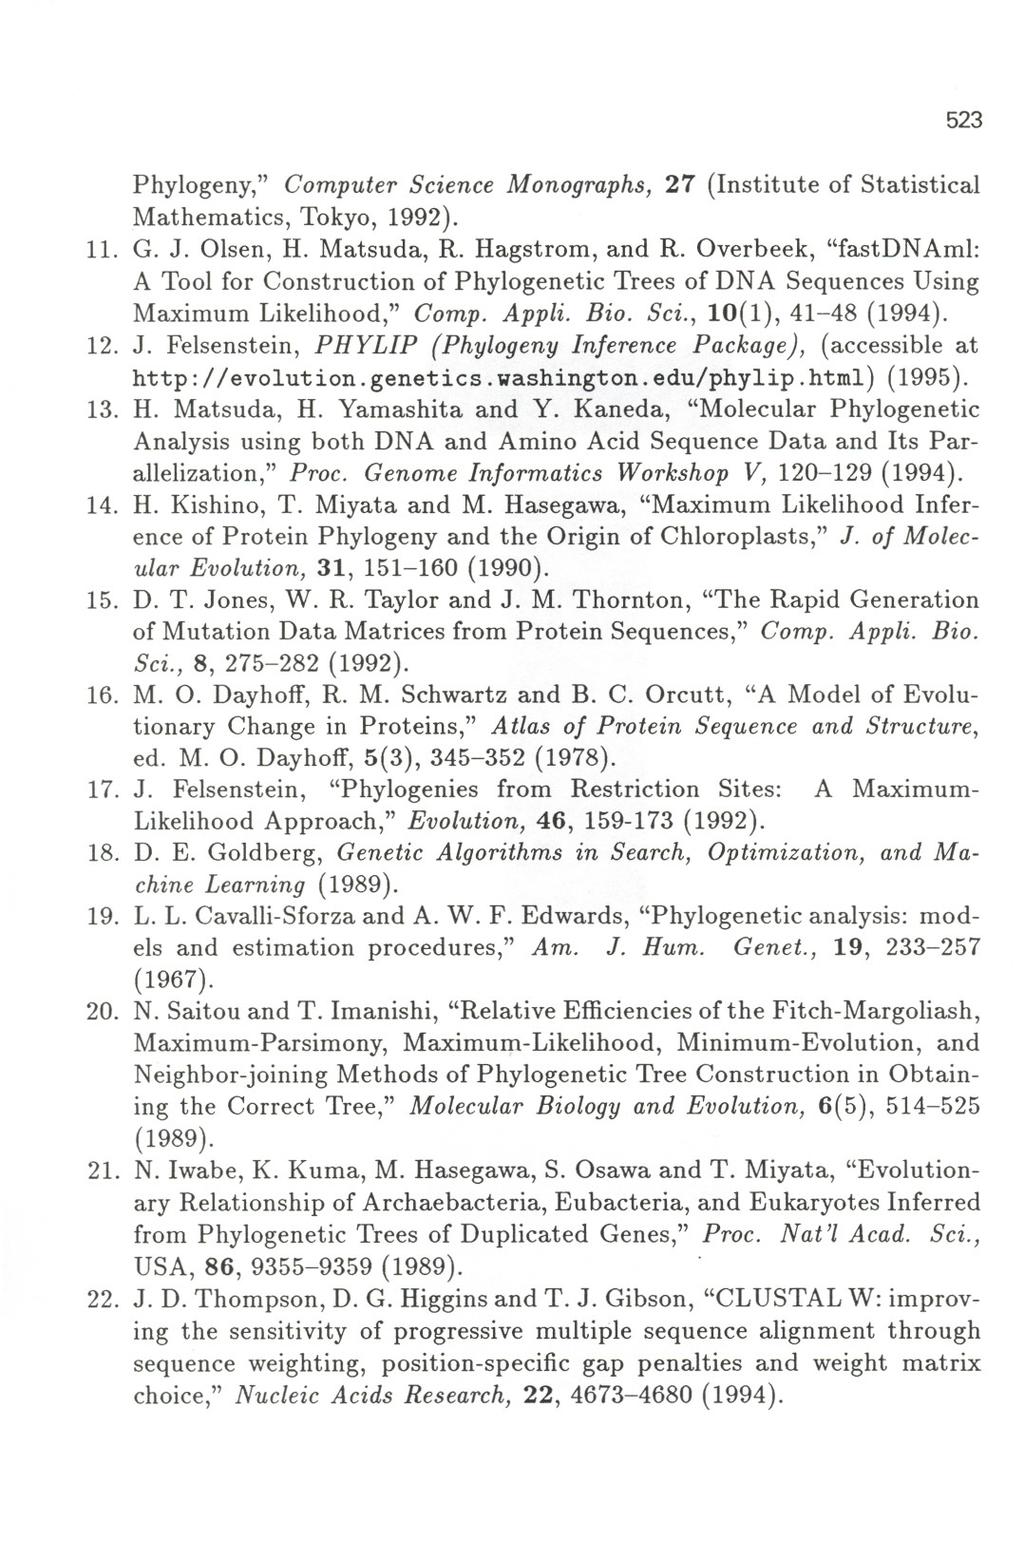 Phylogeny," Computer Science Monographs, 27 (nstitute of Statistical Mathematics, Tokyo, 1992). 11. G. J. Olsen, H. Matsuda, R. Hagstrom, and R.